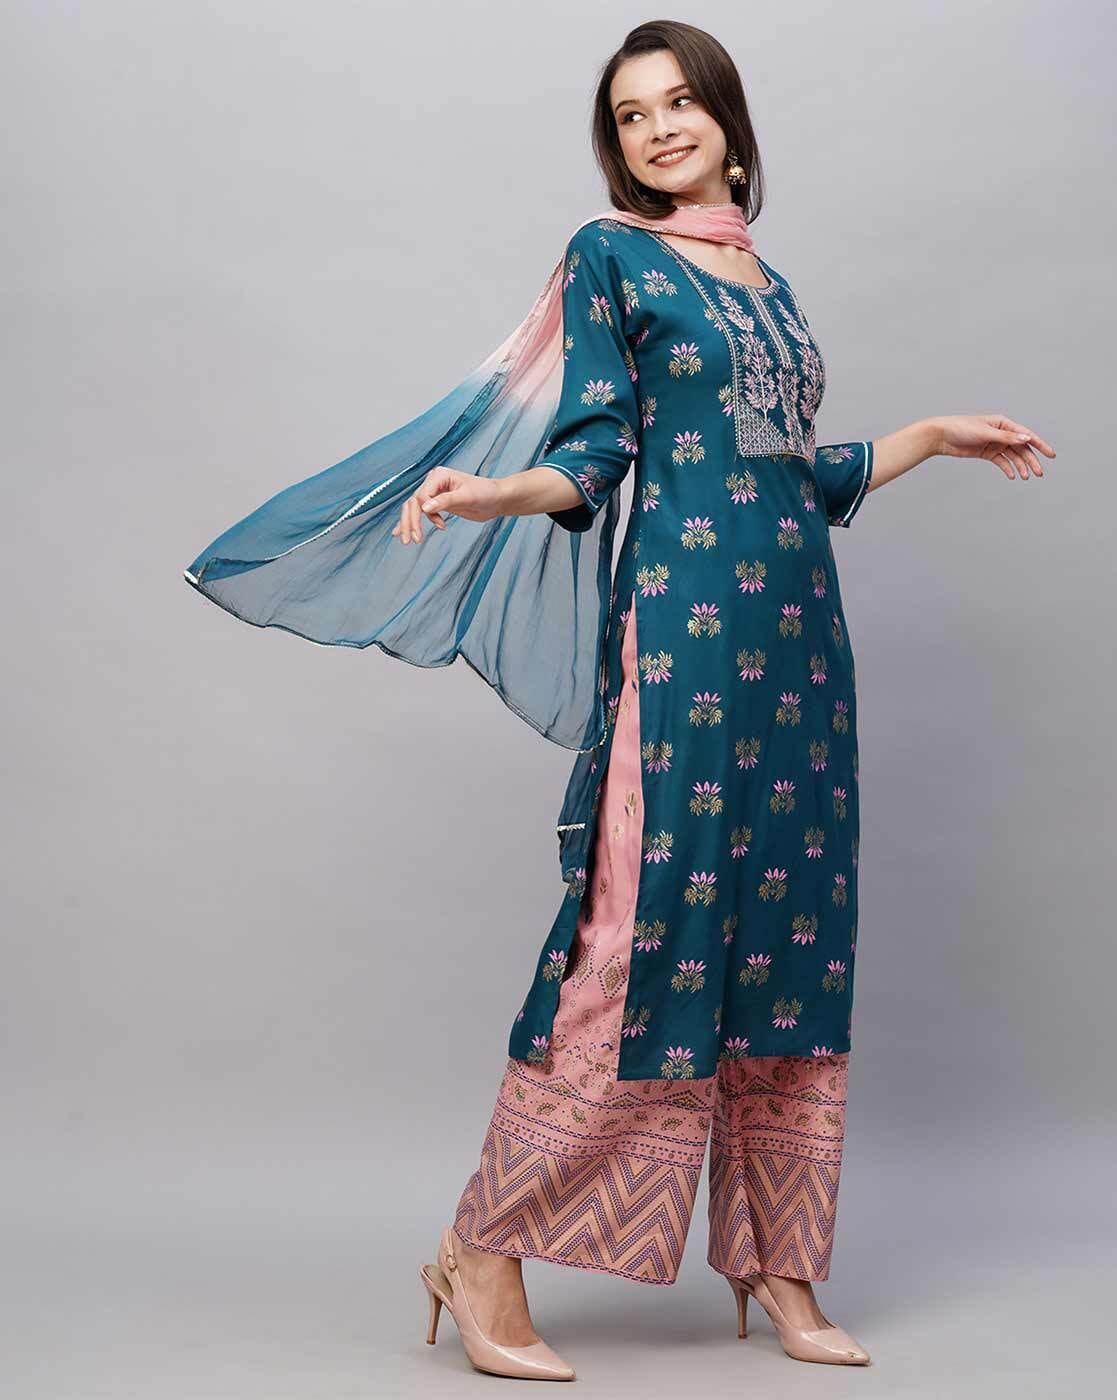 11613 NEW STUNNING PARTY WEAR DESIGNER READYMADE SEQUENCE KURTI WITH PLAZO  BOUTIQUE COLLECTION SELLER IN INDIA MAURITIUS LONDON - Reewaz International  | Wholesaler & Exporter of indian ethnic wear catalogs.